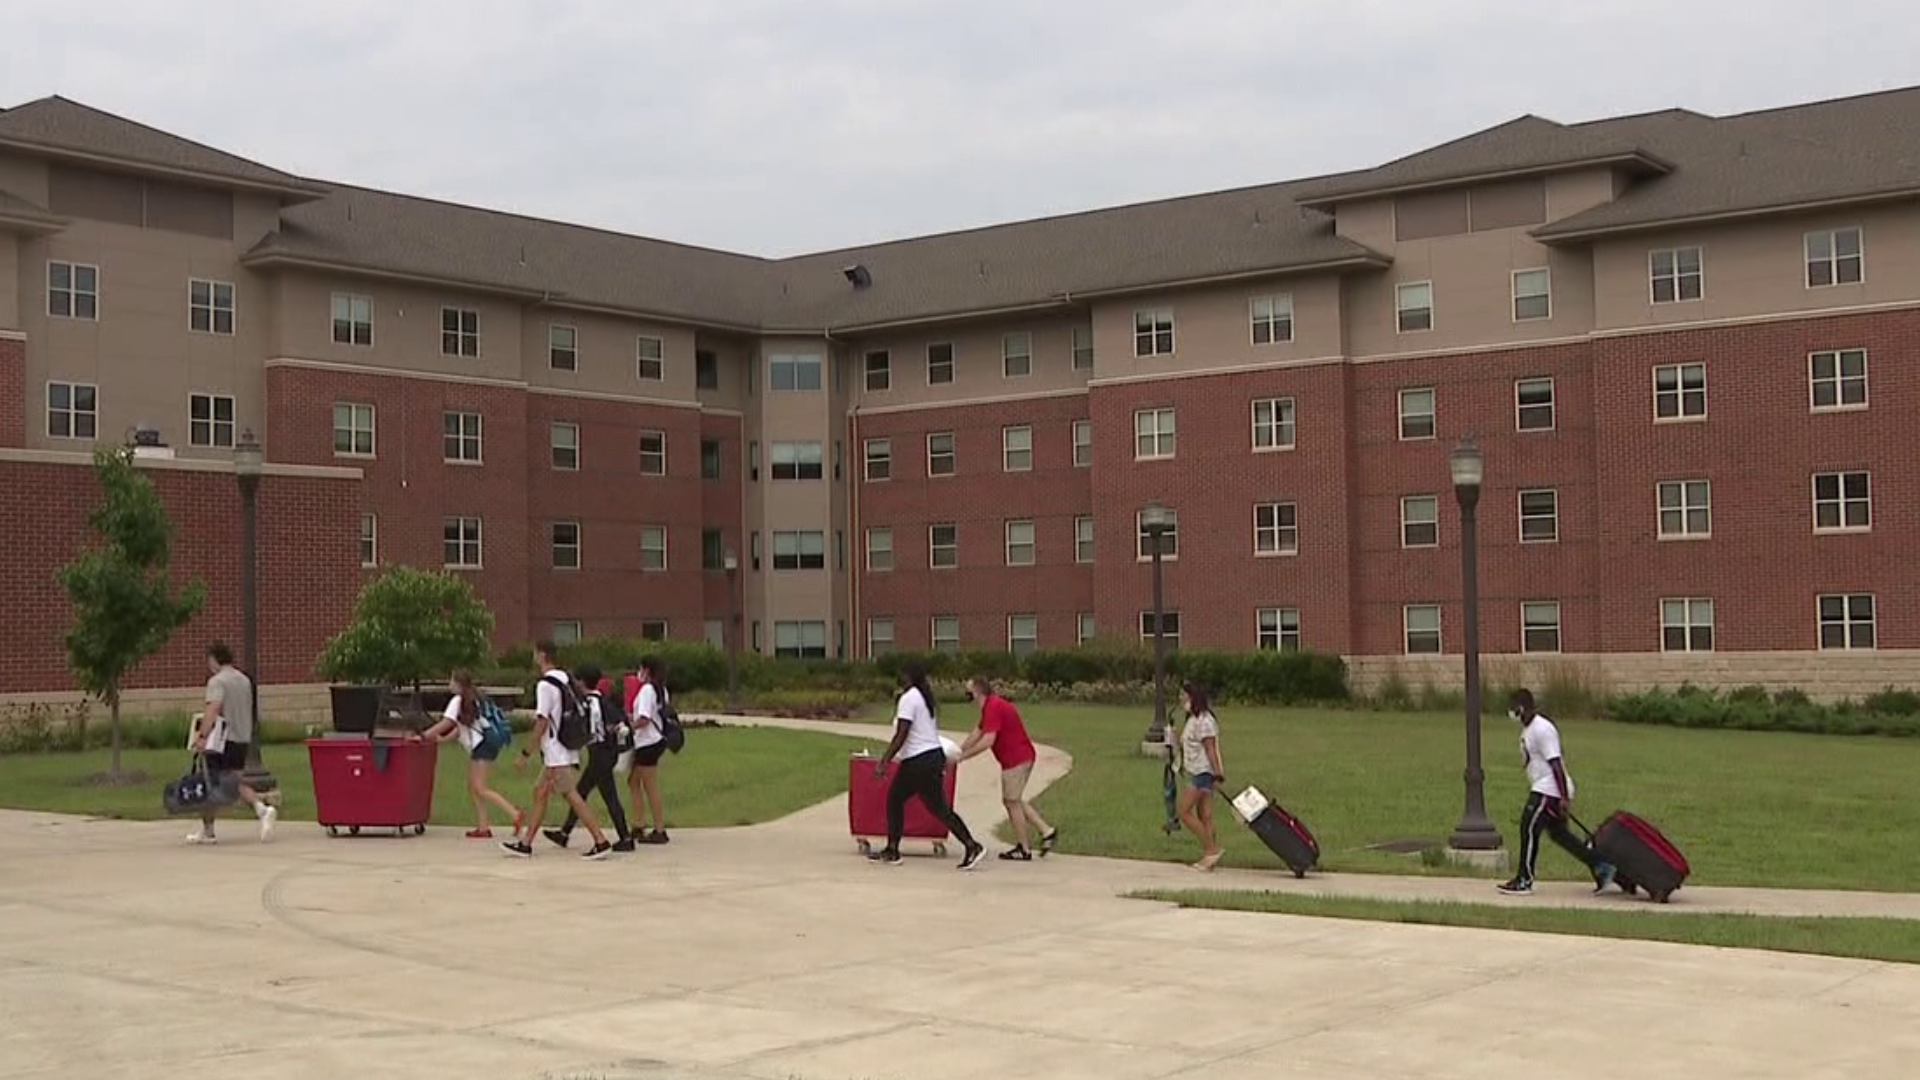 Move-in day at ESU actually happened for the first time since the pandemic sent most students home to learn virtually.